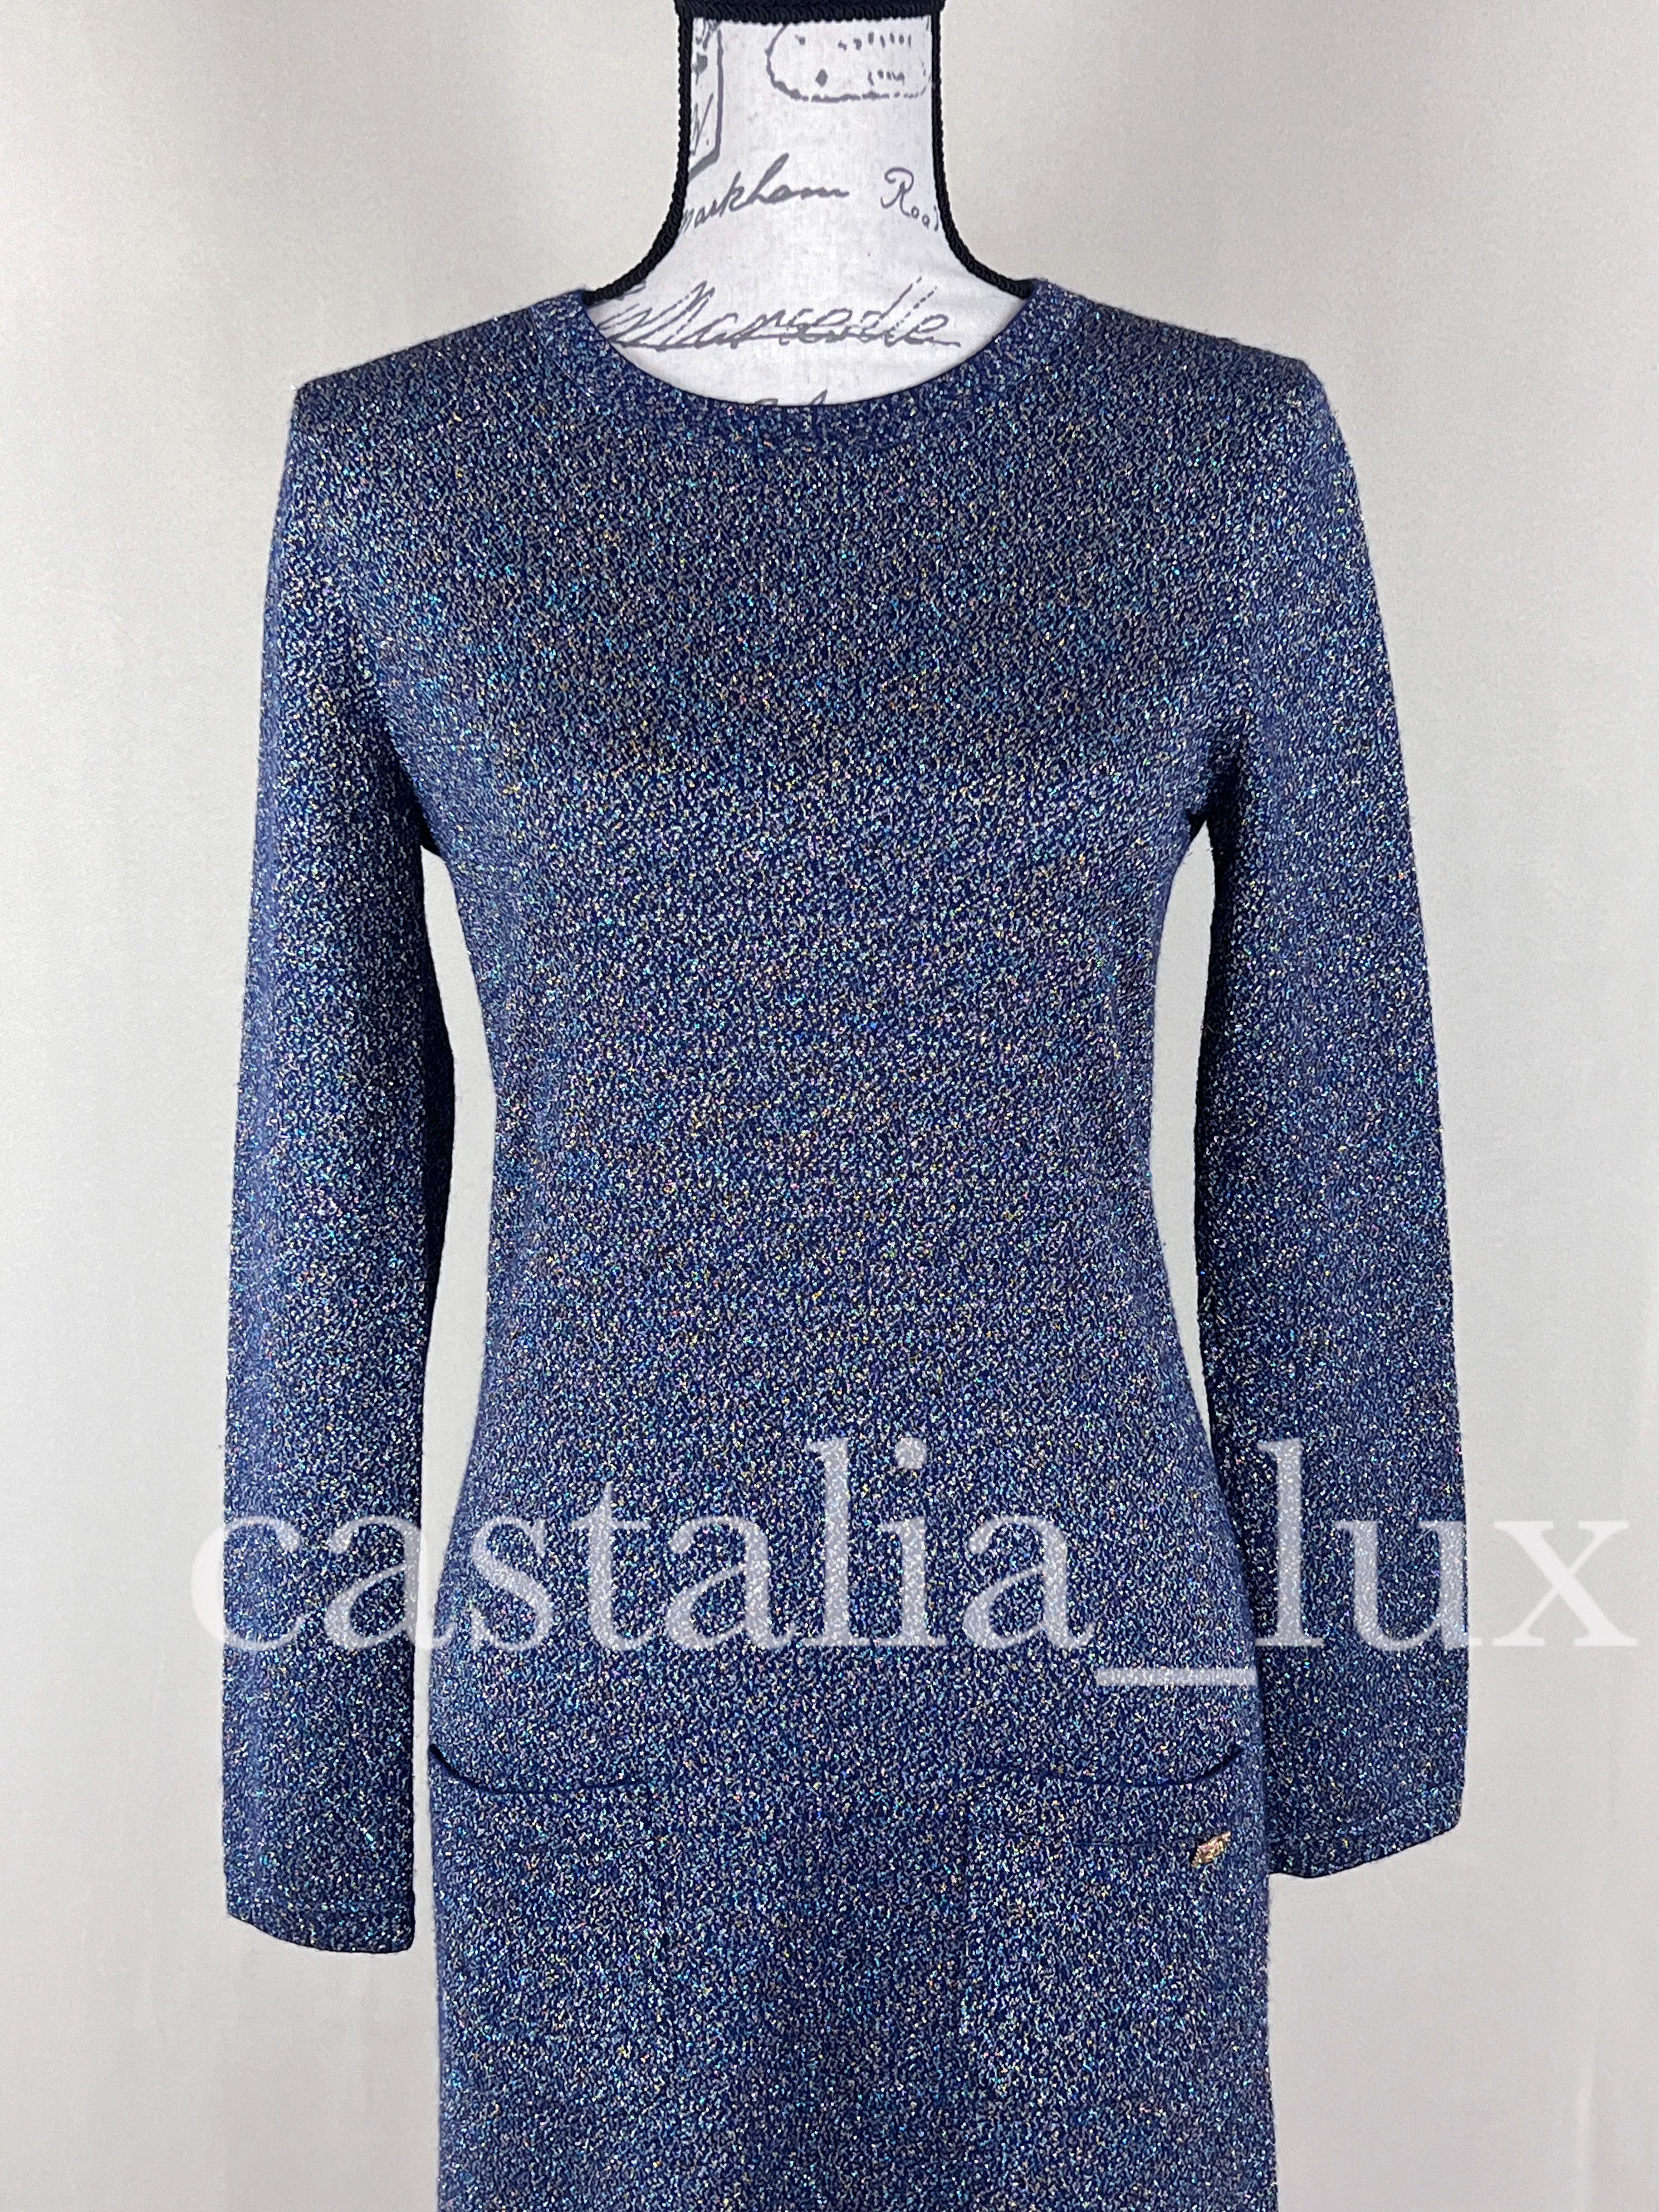 Chanel New Paris / Byzance Shimmer Cashmere Dress In New Condition For Sale In Dubai, AE